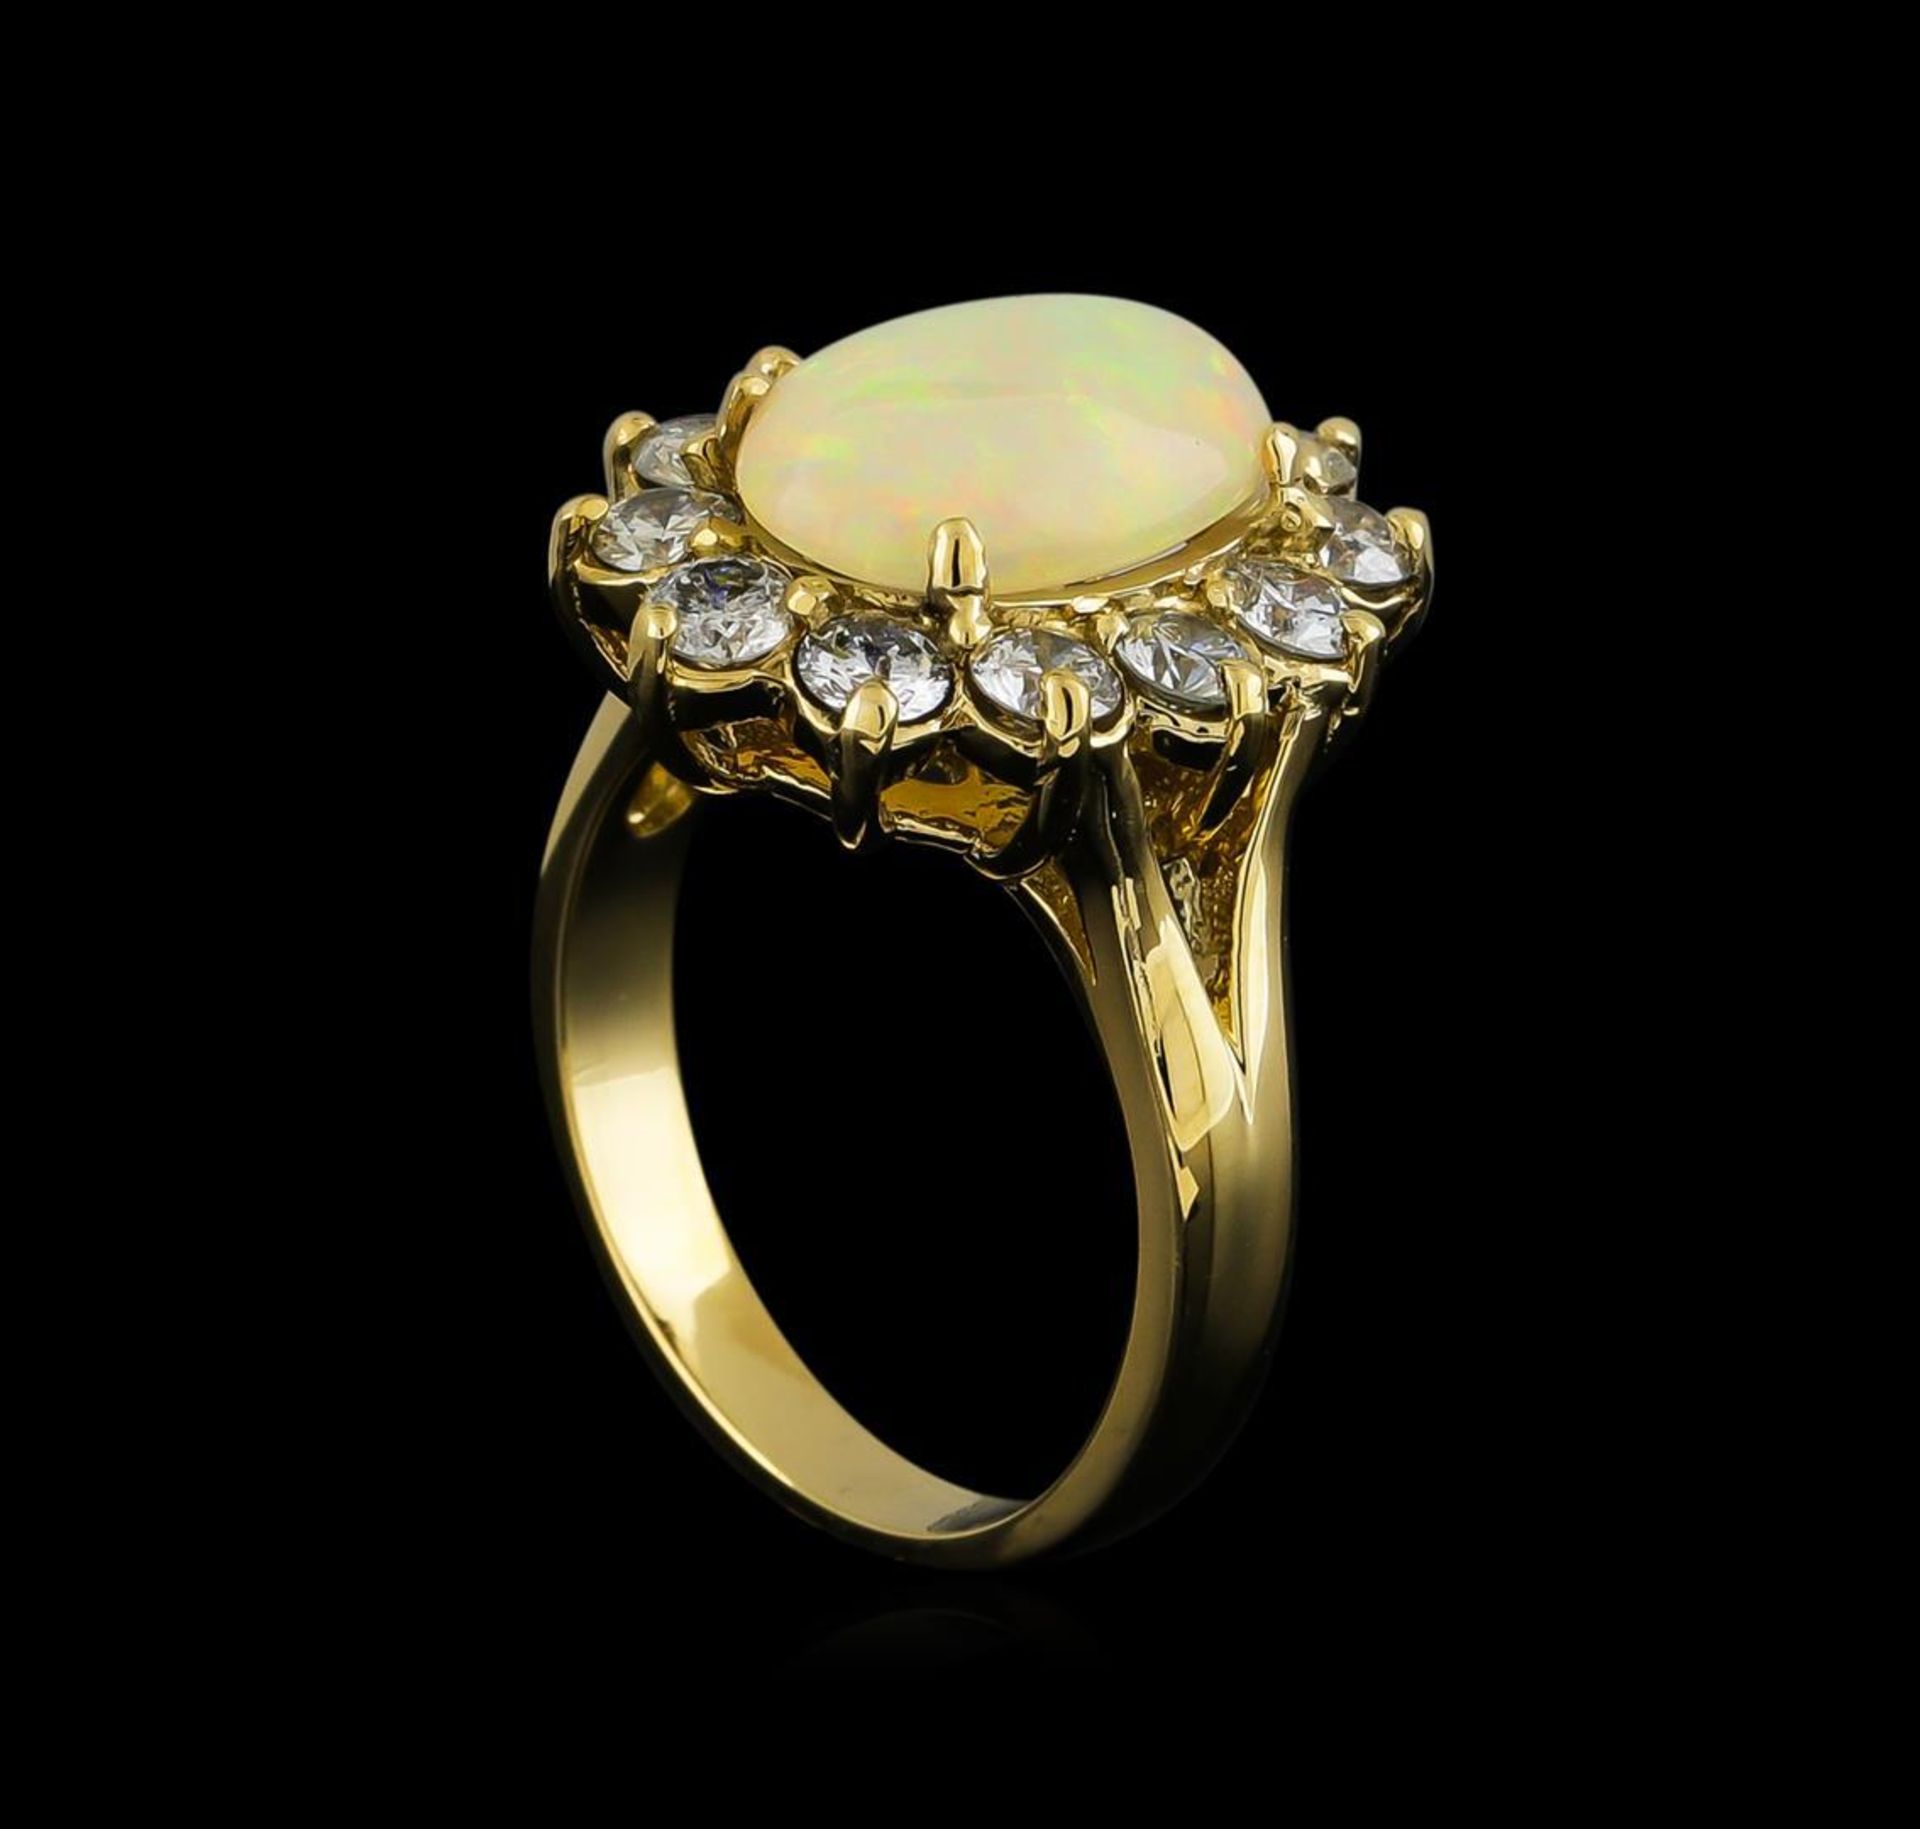 2.56 ctw Opal and Diamond Ring - 14KT Yellow Gold - Image 4 of 5